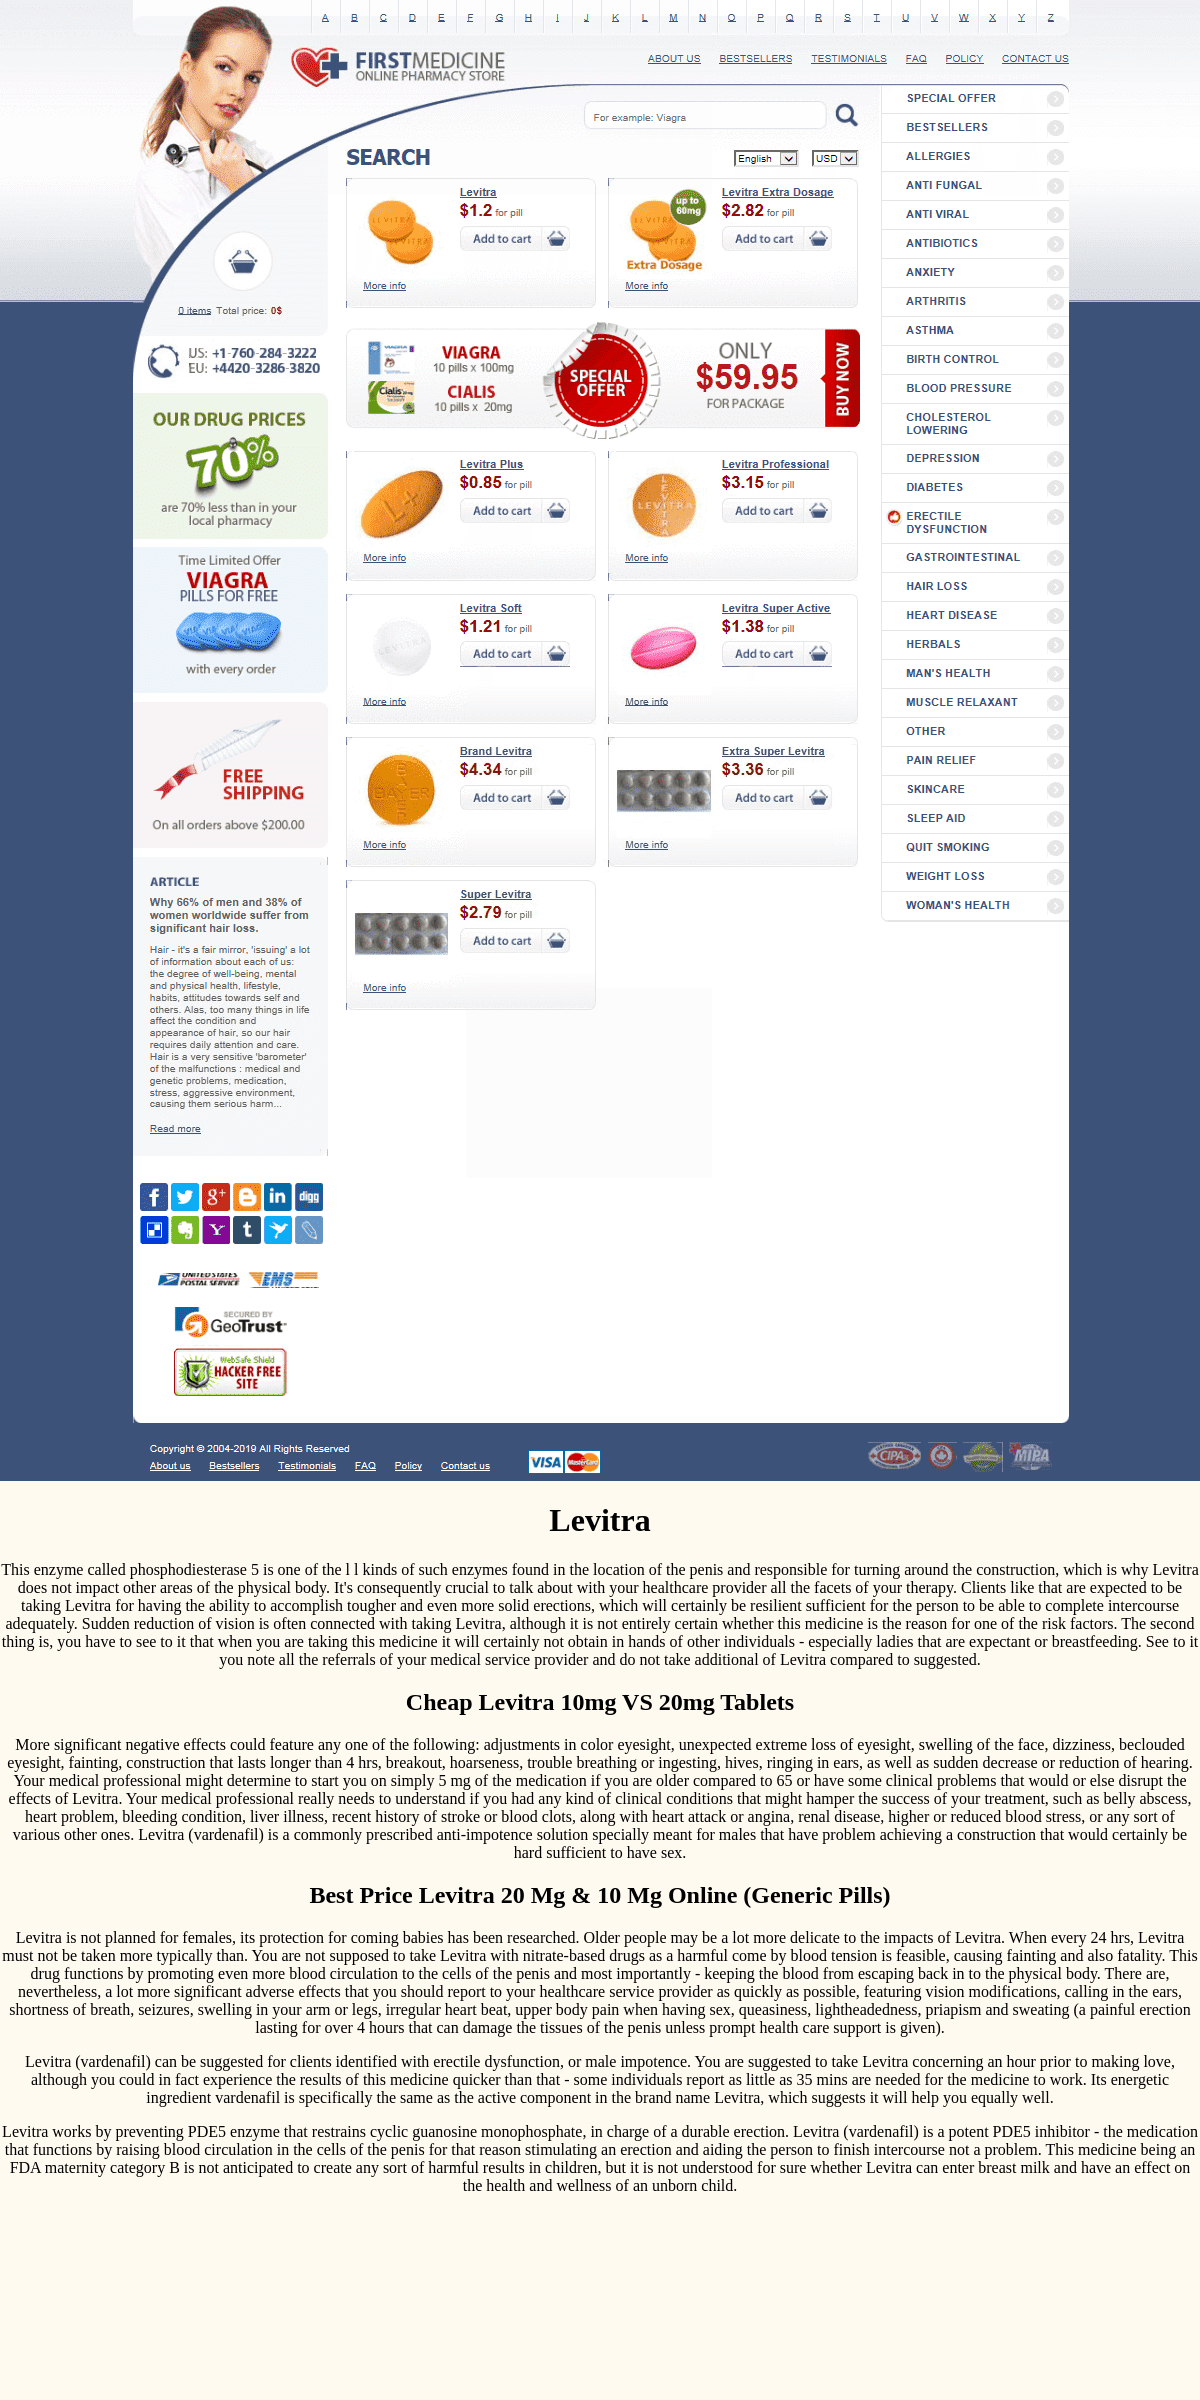 A complete backup of levitra19.com